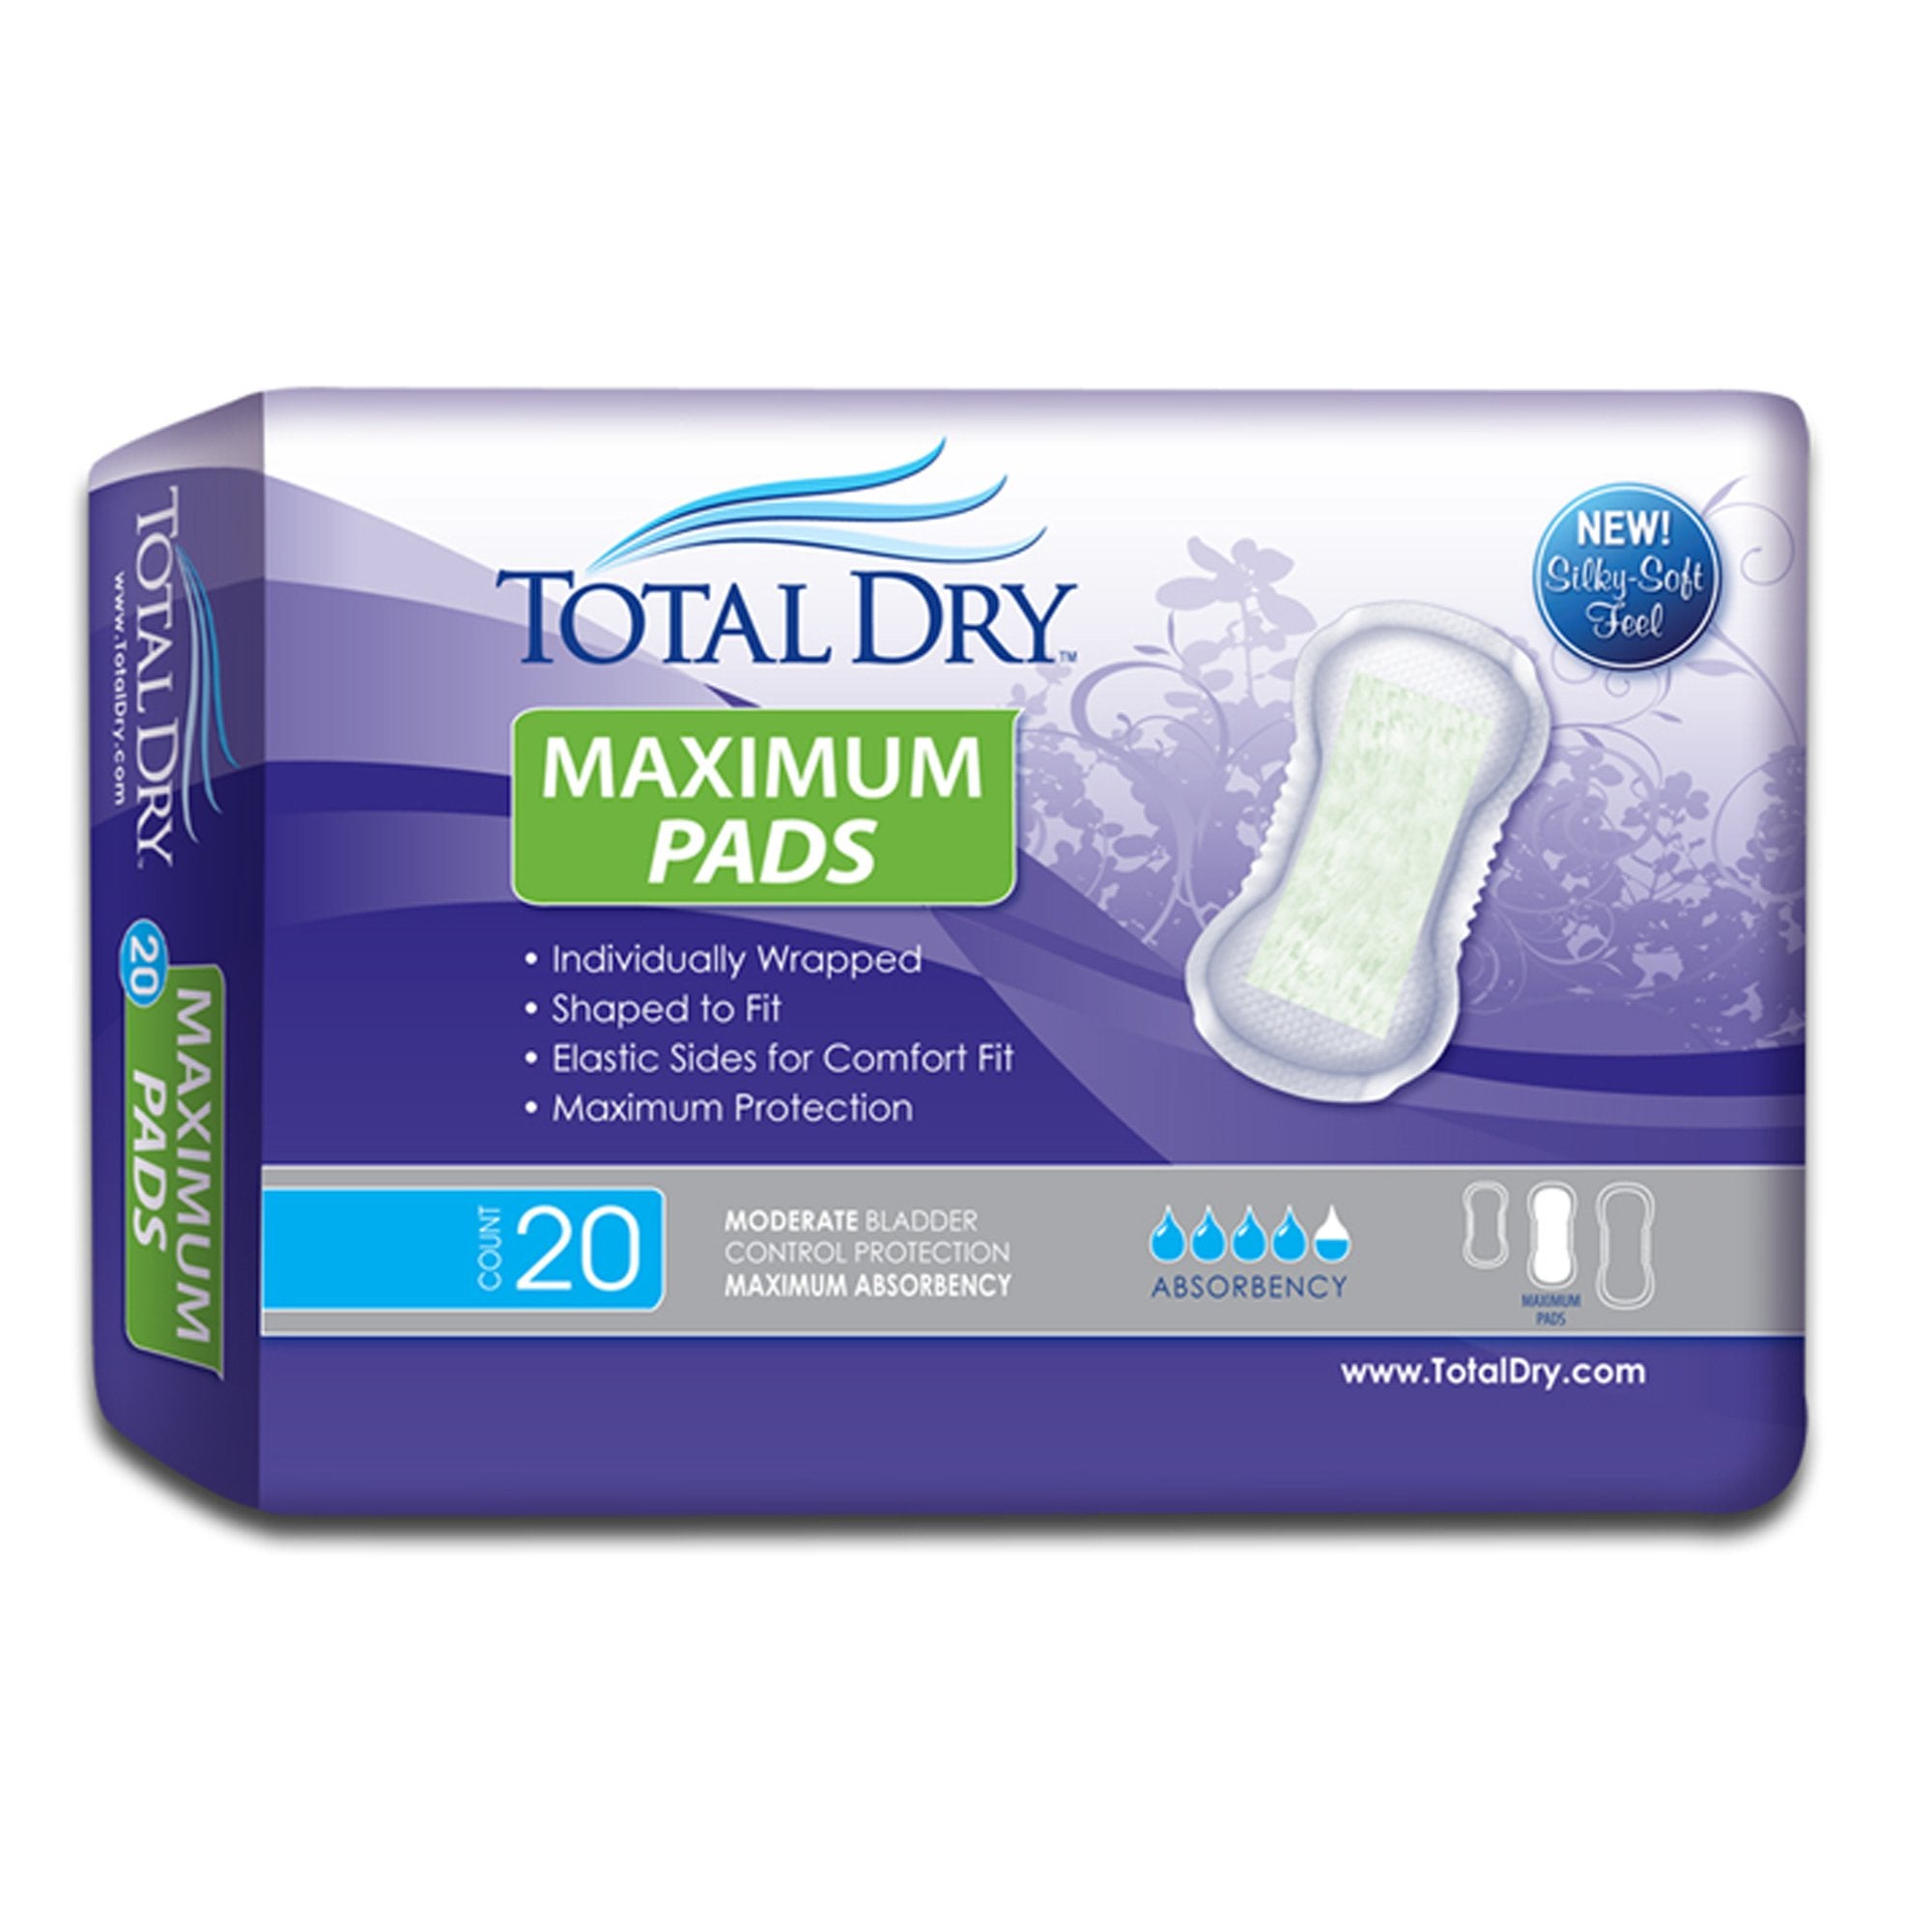 TotalDry Maximum Pads, Moderate Absorbency